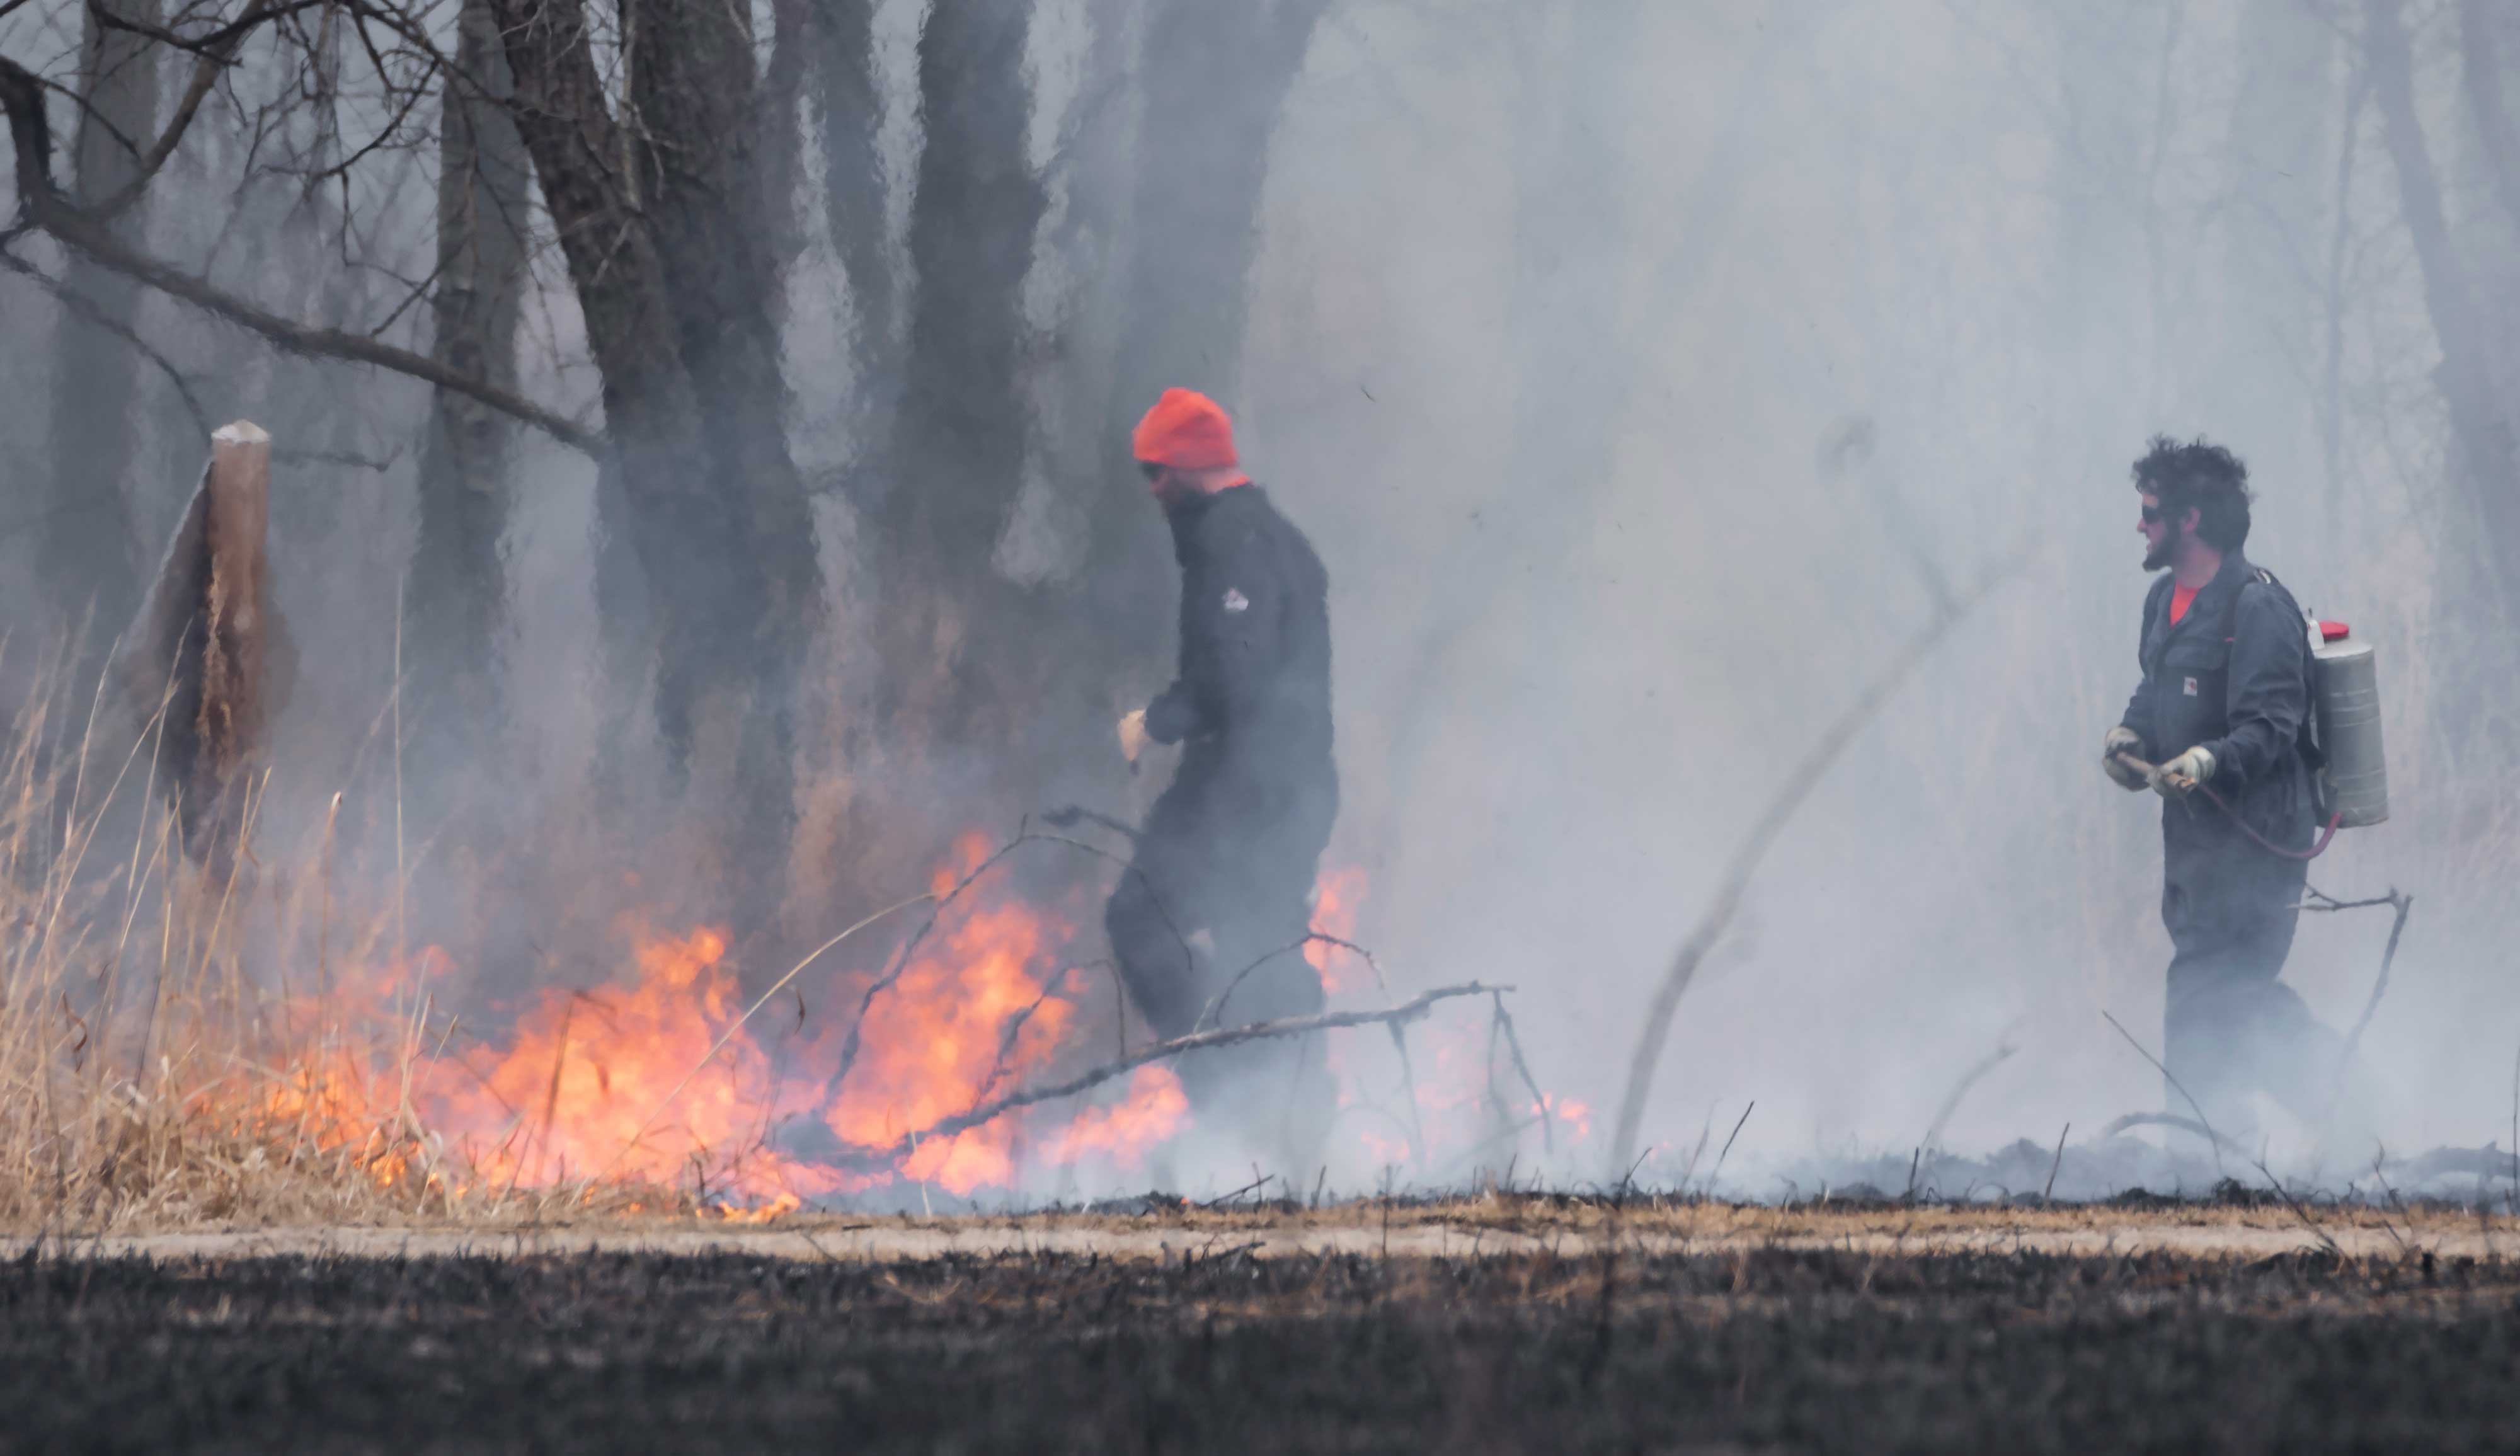 Two men participating in a controlled burn.